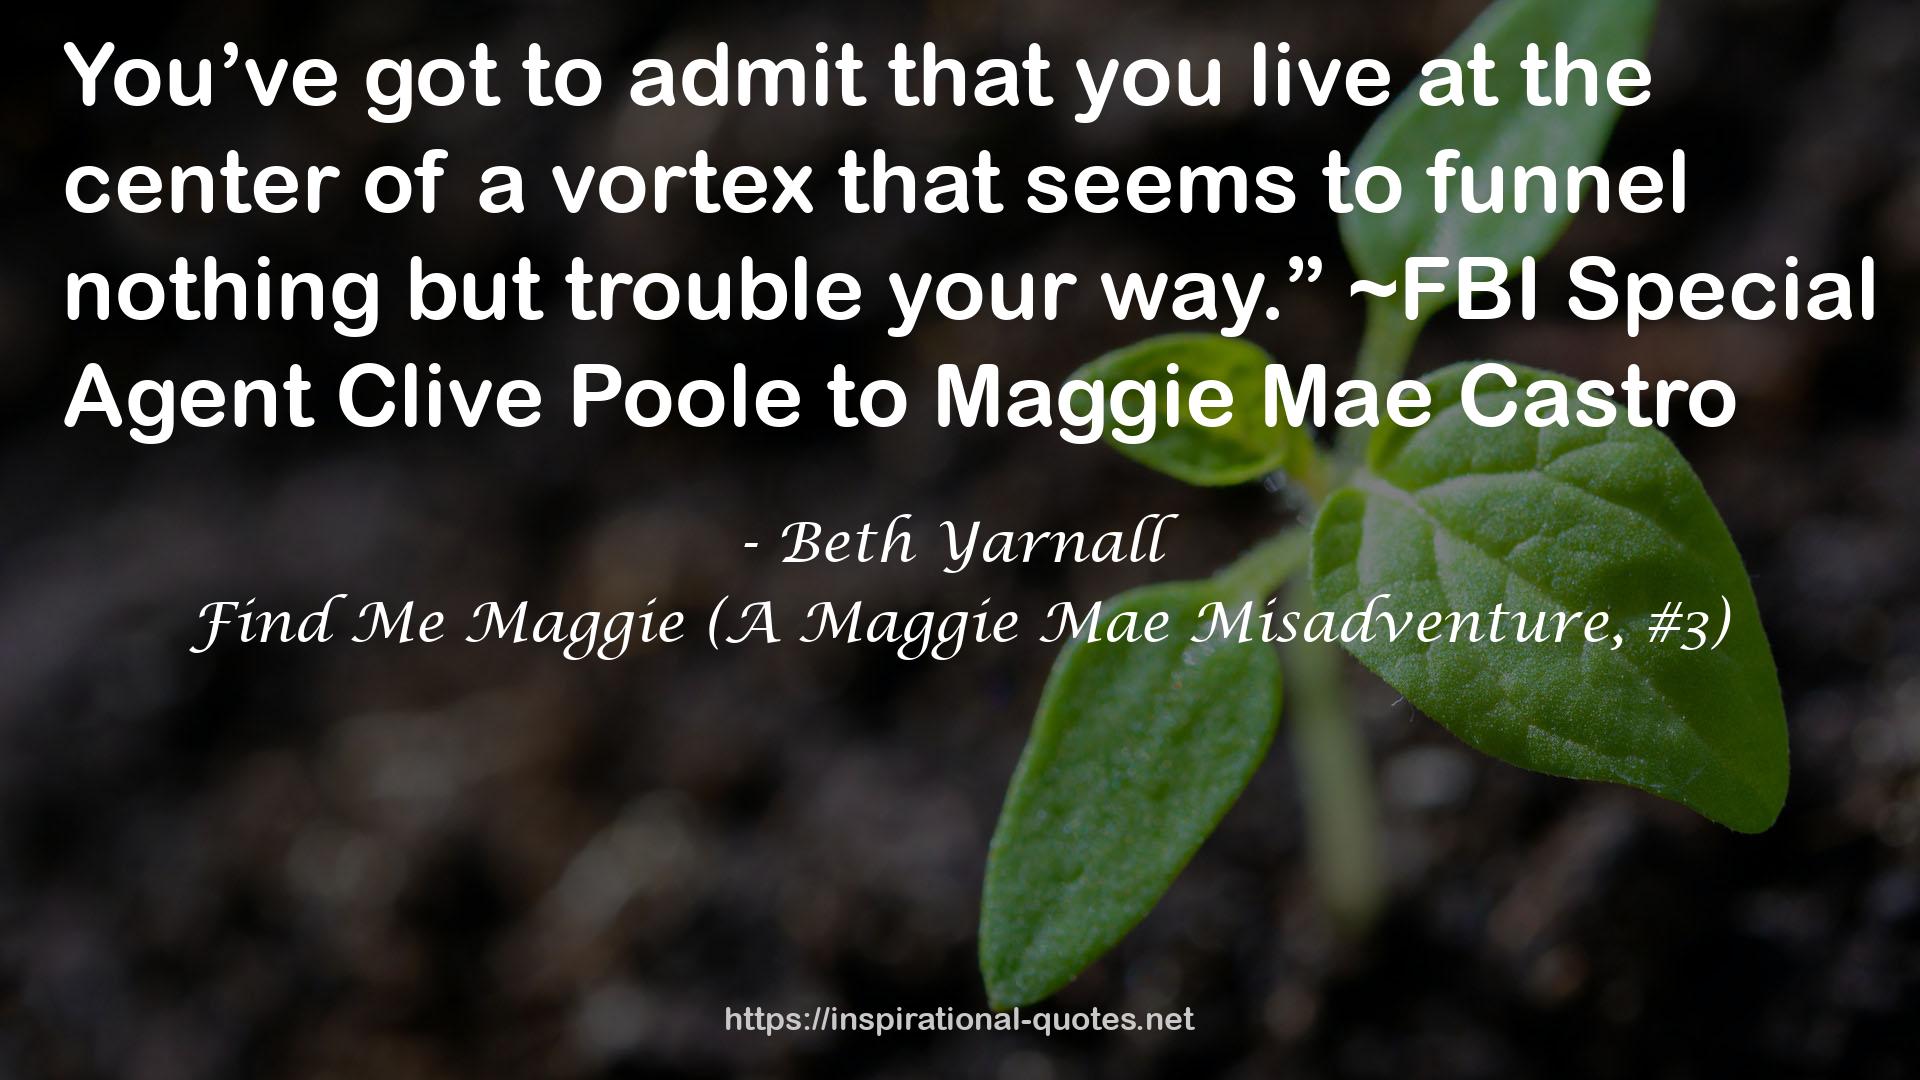 Find Me Maggie (A Maggie Mae Misadventure, #3) QUOTES